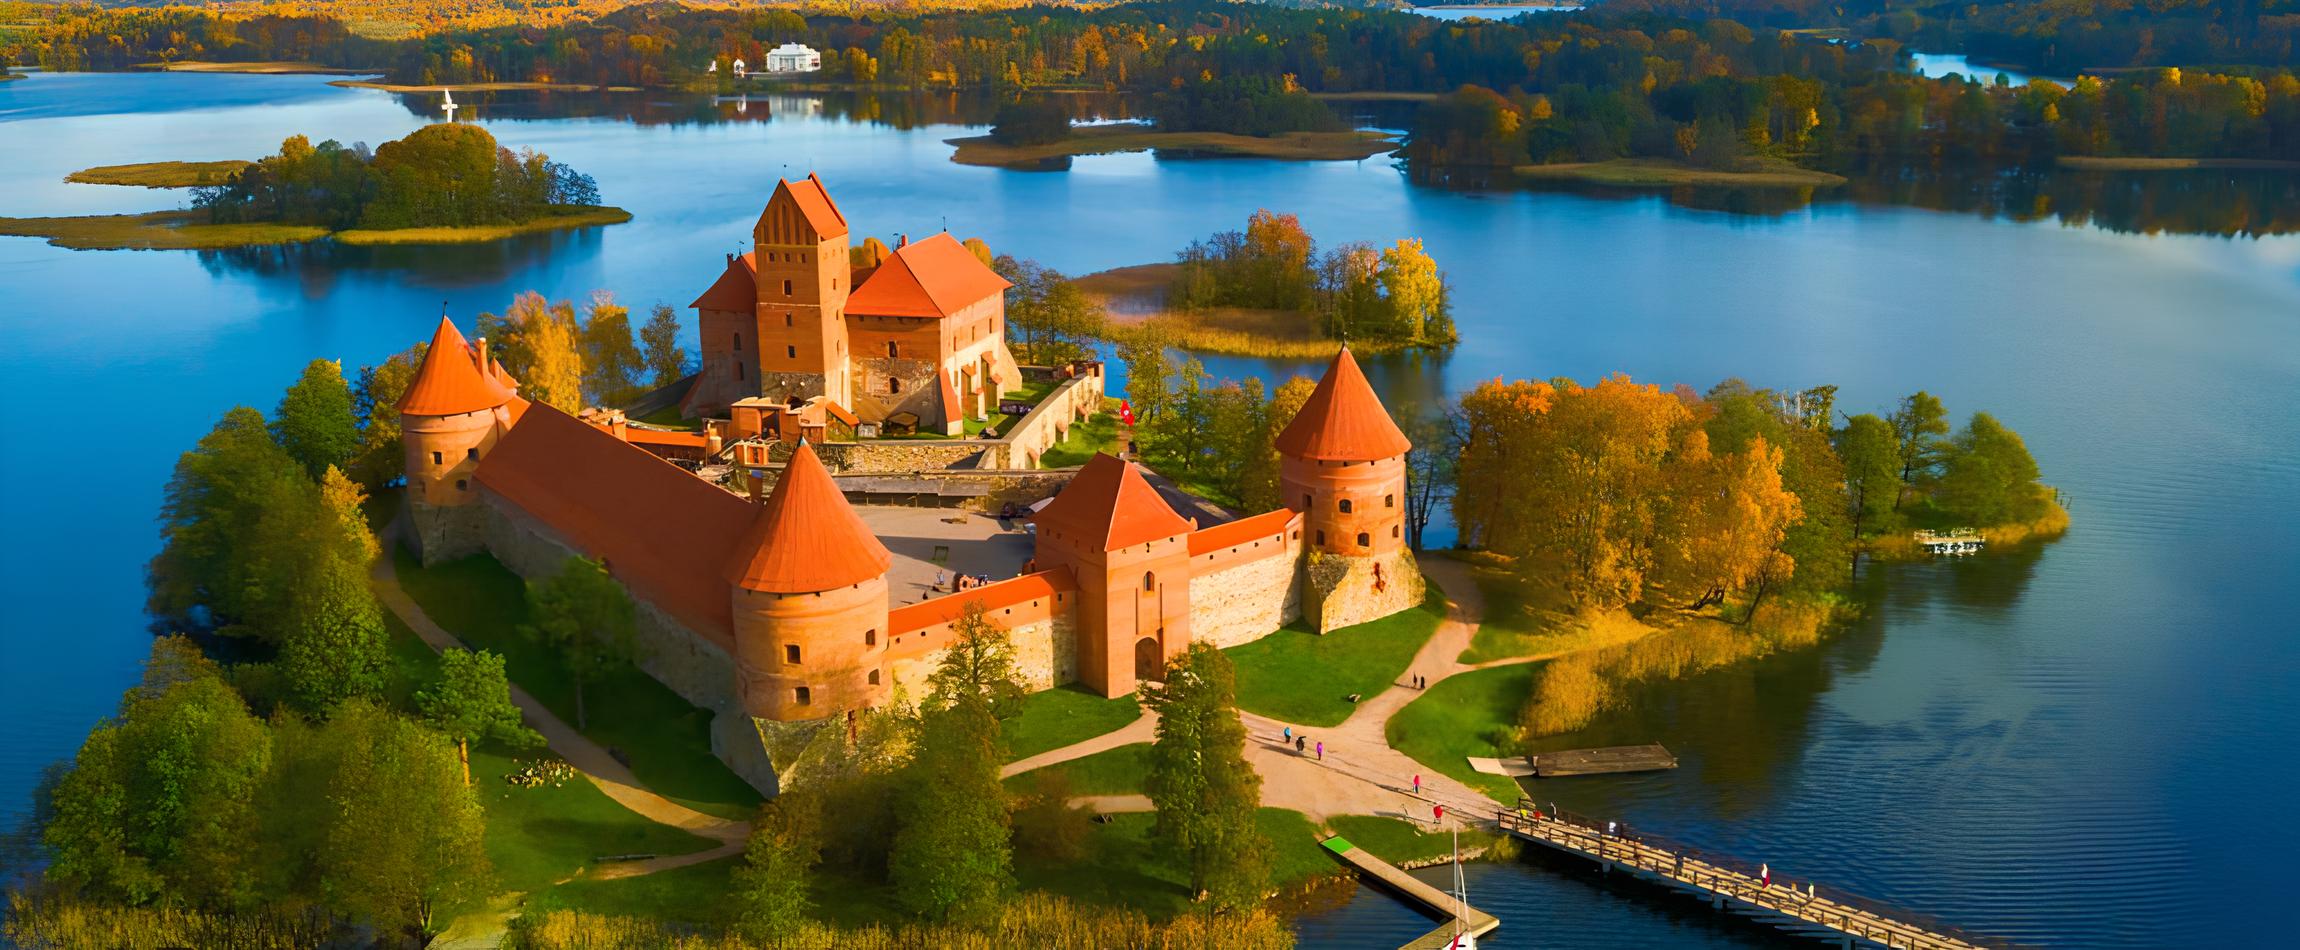 Activities to do in Lithuania